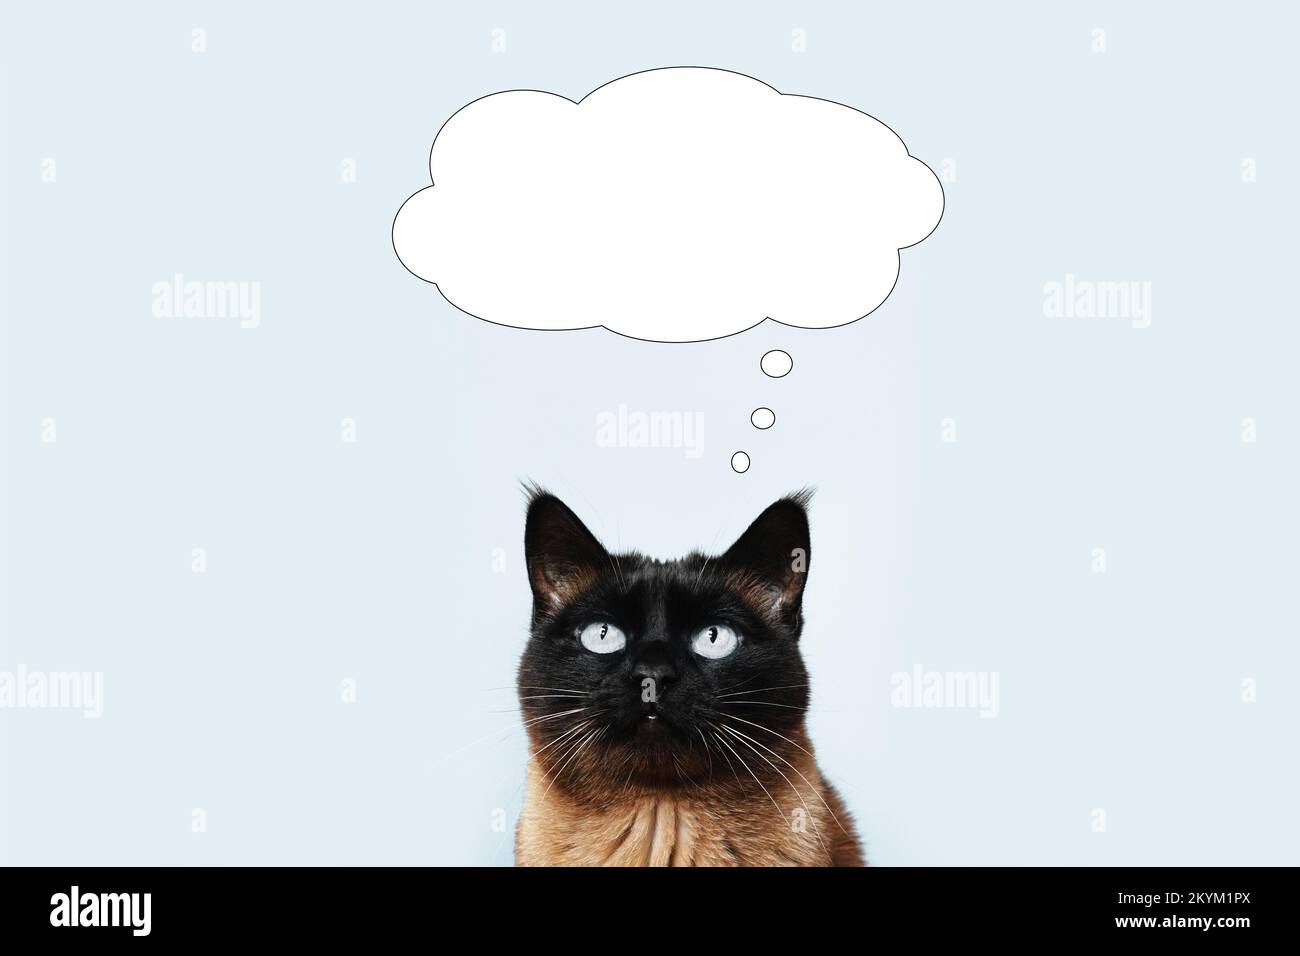 cat thinking or dreaming of something in thought bubble with copy space Stock Photo